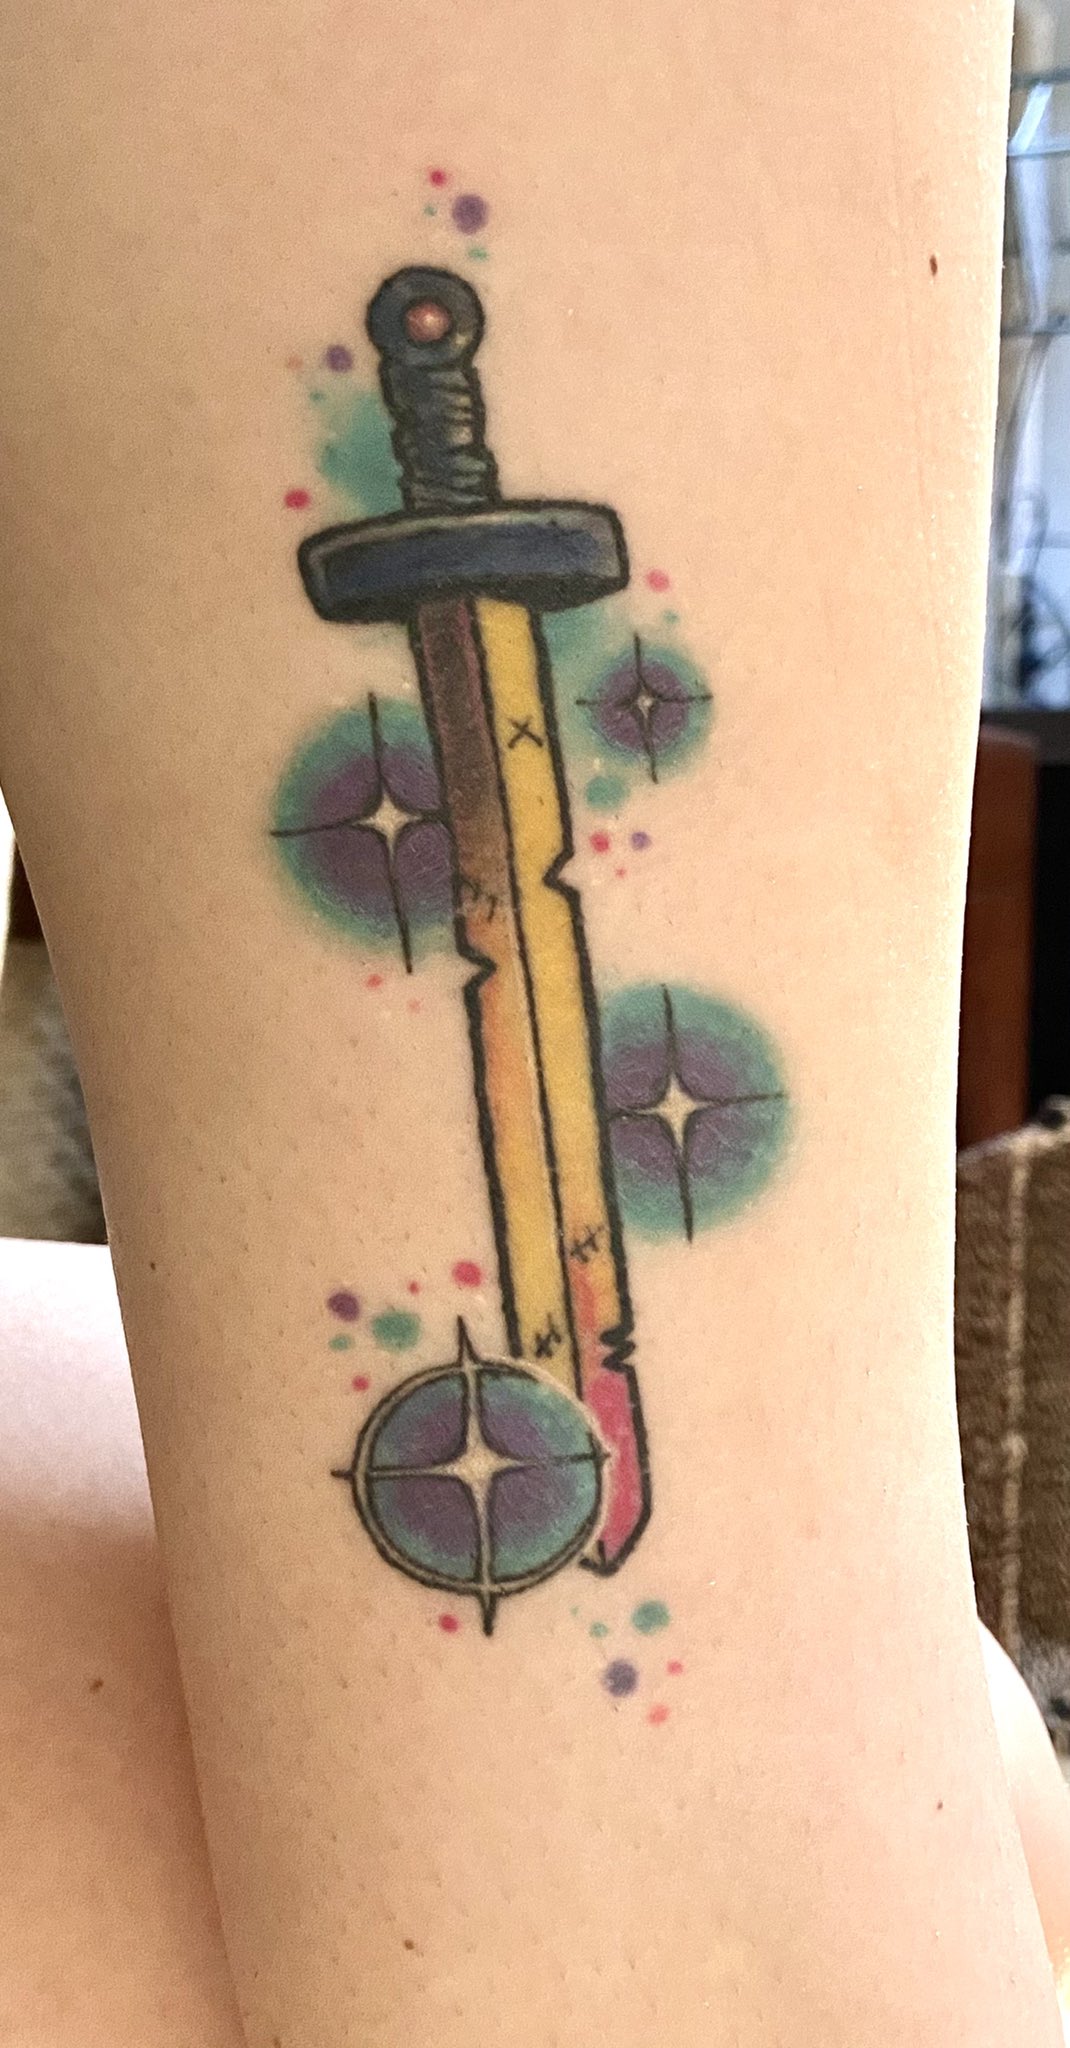 Made a long waited tattoo Dont mind the cuts its all from that grass  sword curse ᕕ ᐛ ᕗ  radventuretime